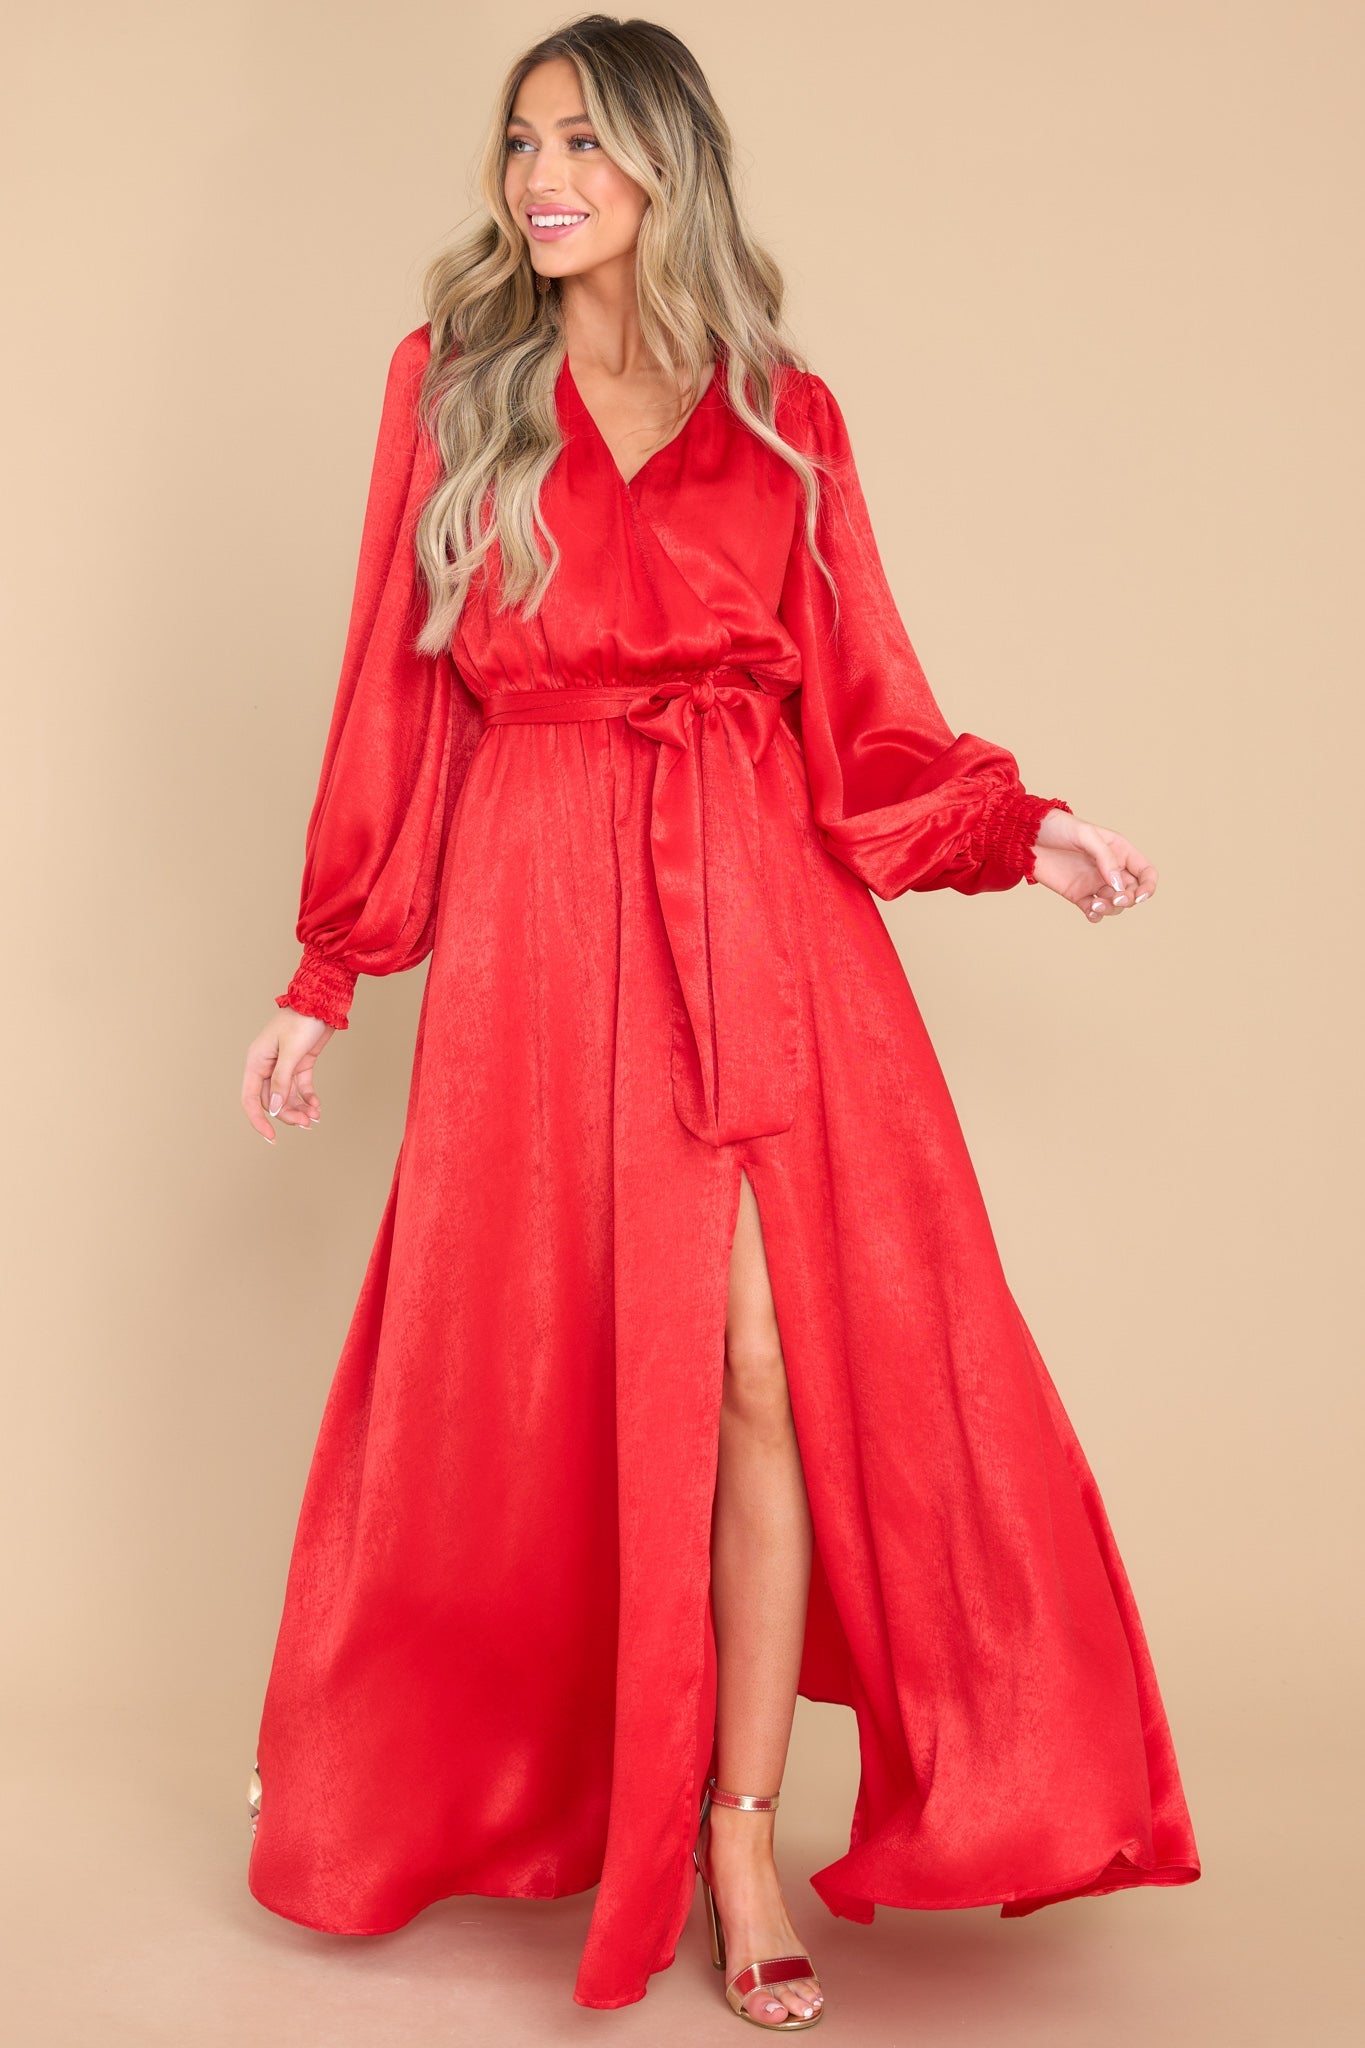 This all red dress features a v-neckline, a snap closure at the bust, puff sleeves with elastic cuffs, an elastic waist band with a removable adjustable self tie around the waist, and a slit on the side.